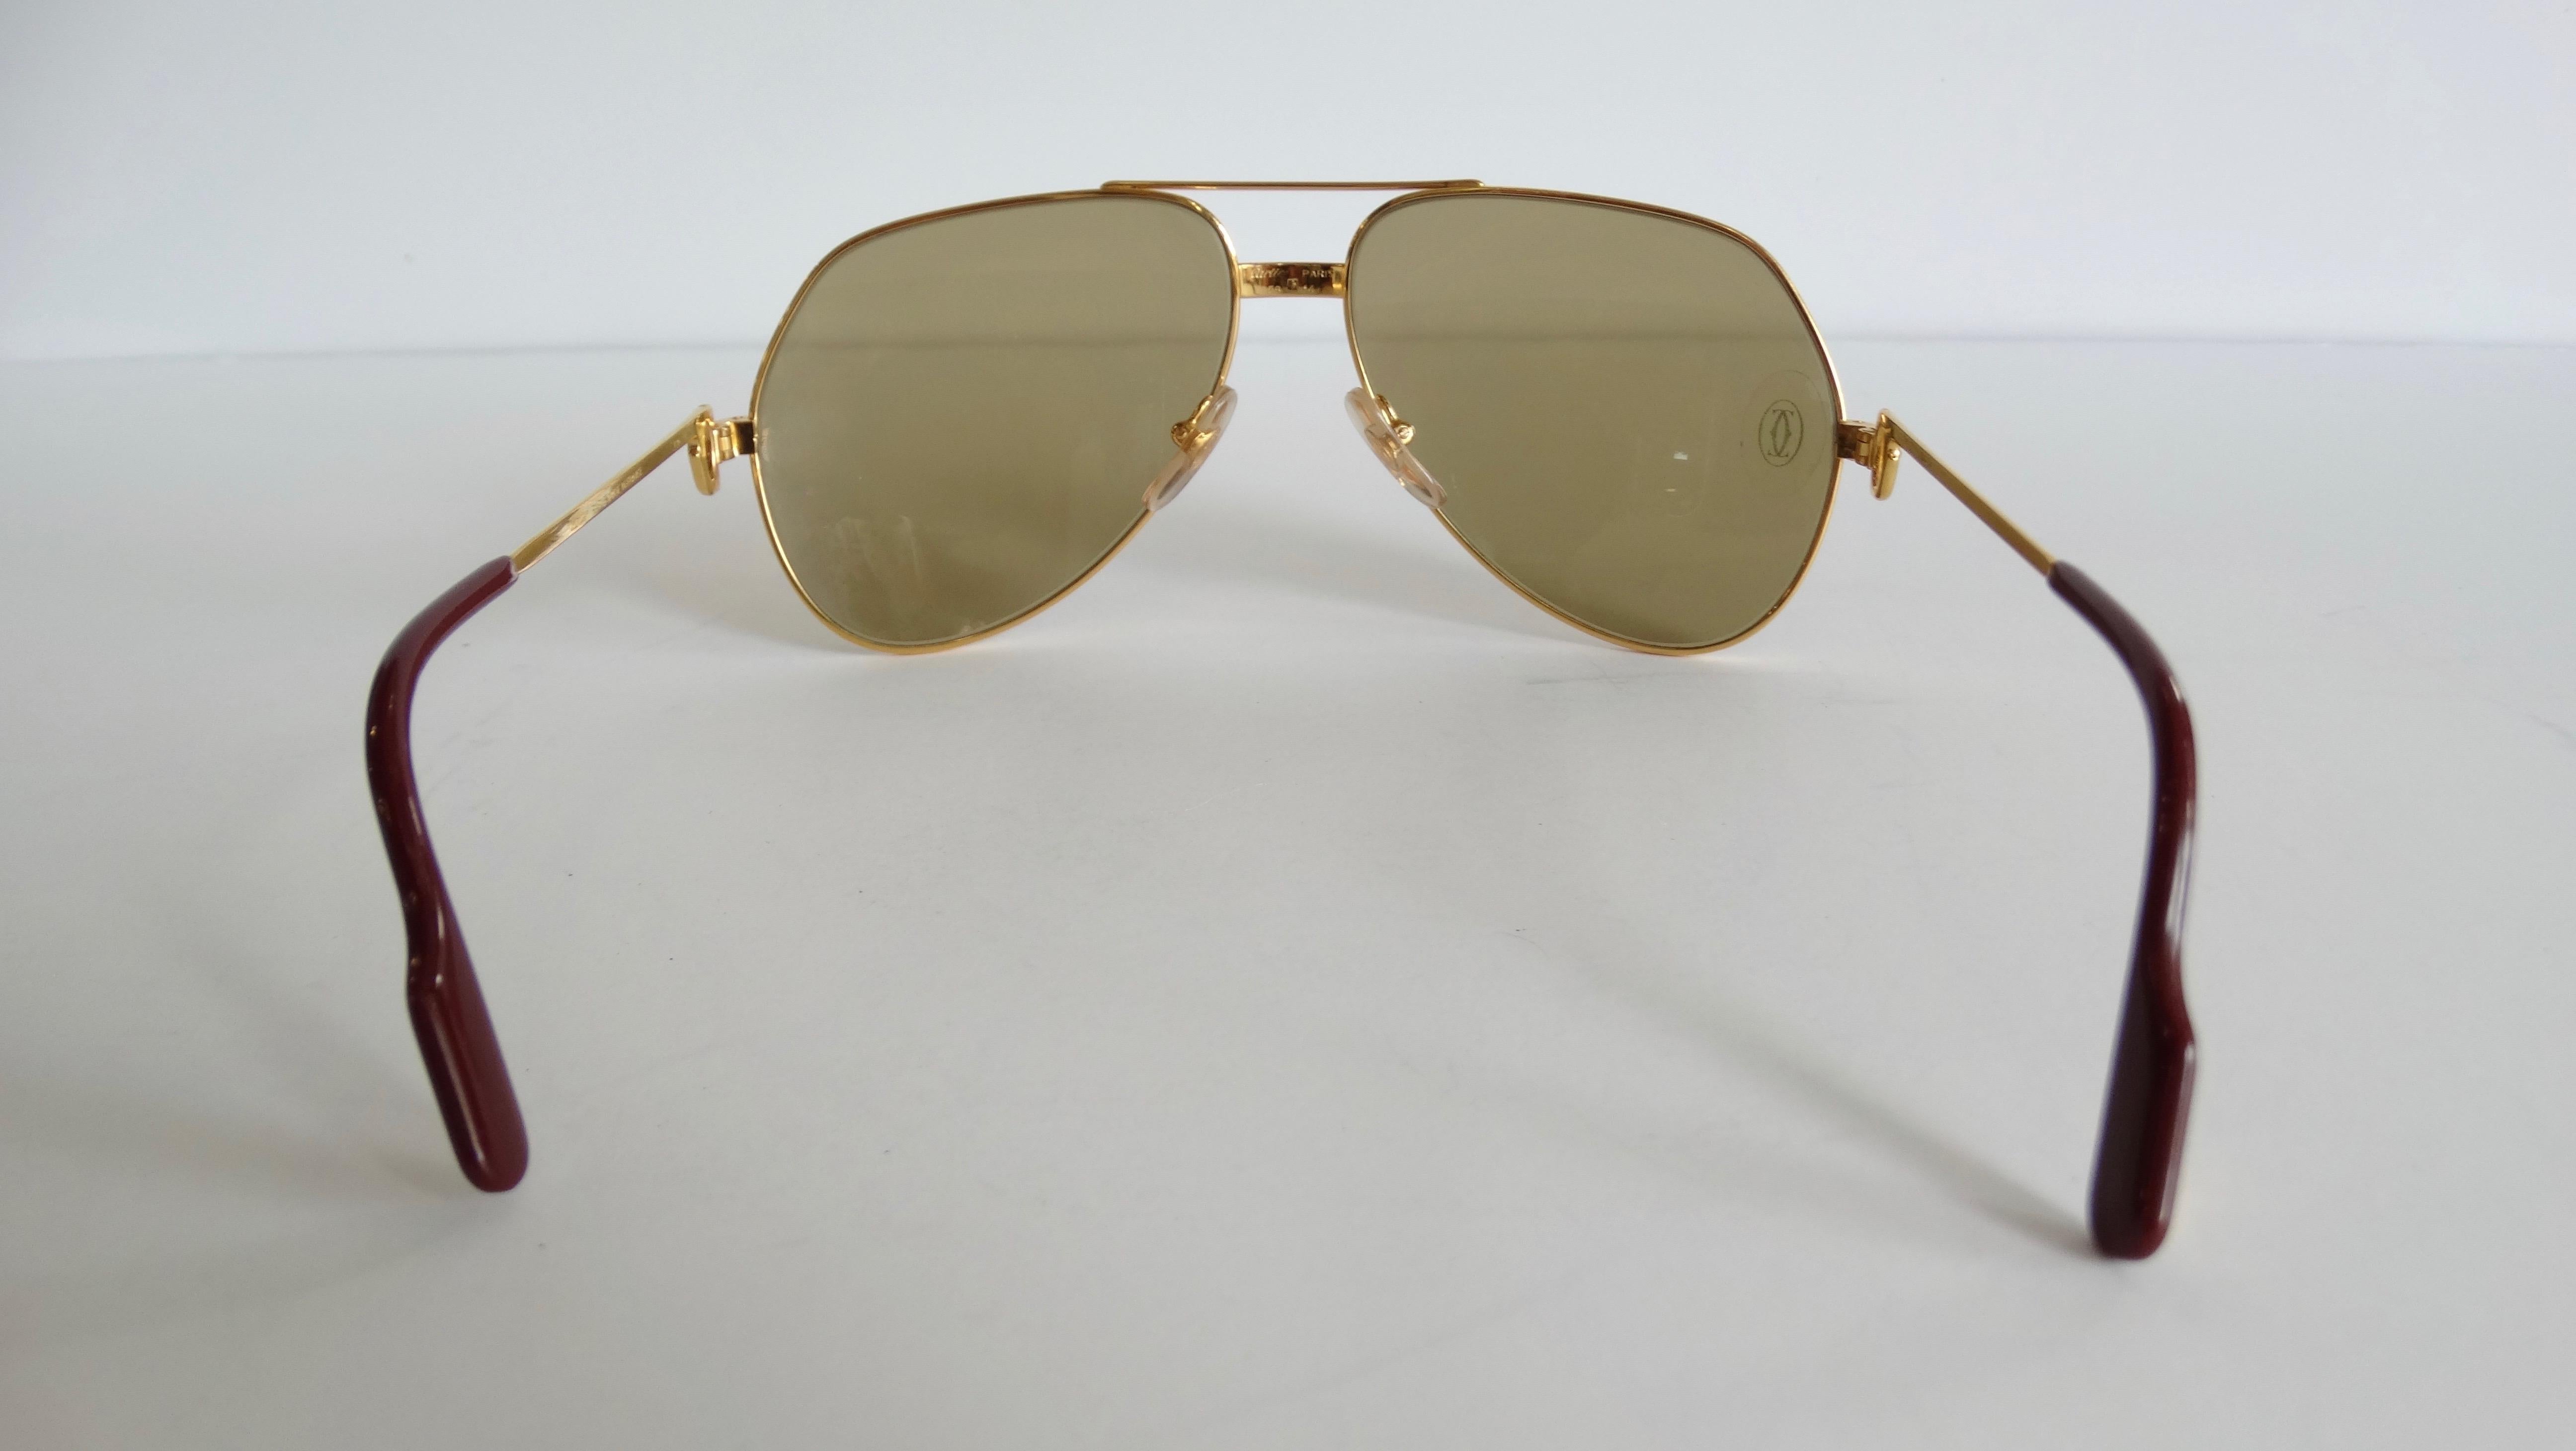 Snag yourself the ultimate pair of vintage sunnies! Circa 1983-1997, these Cartier aviator sunglasses are famously known as the Vendome Louis, are mixed silver/gold plated and feature brown tinted lenses with the Cartier logo engraved. Arms include